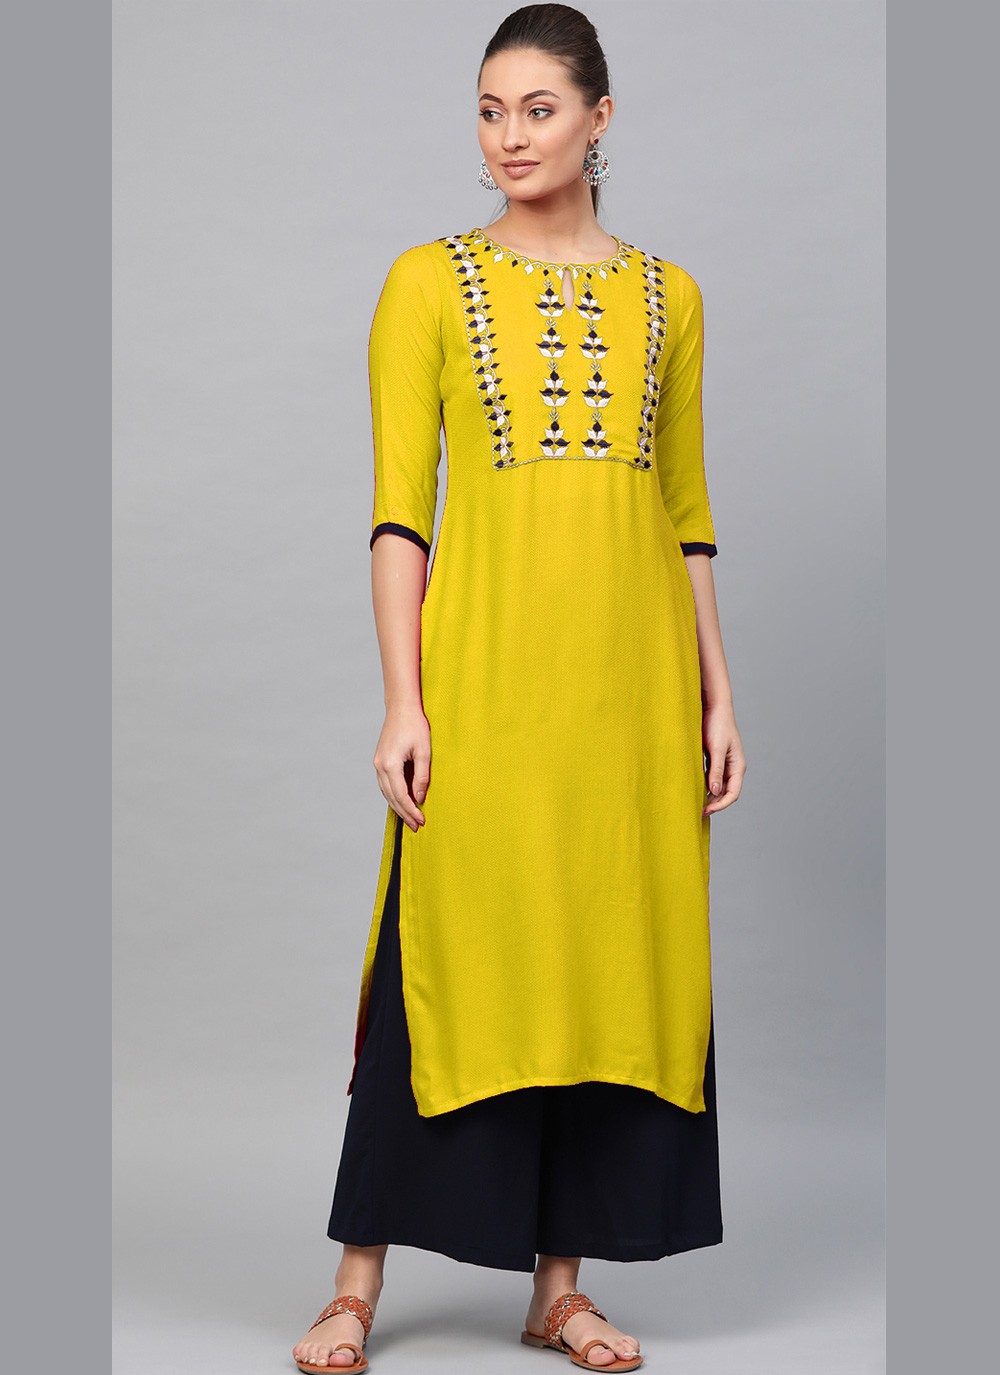 Discover more than 216 yellow kurti buy online latest